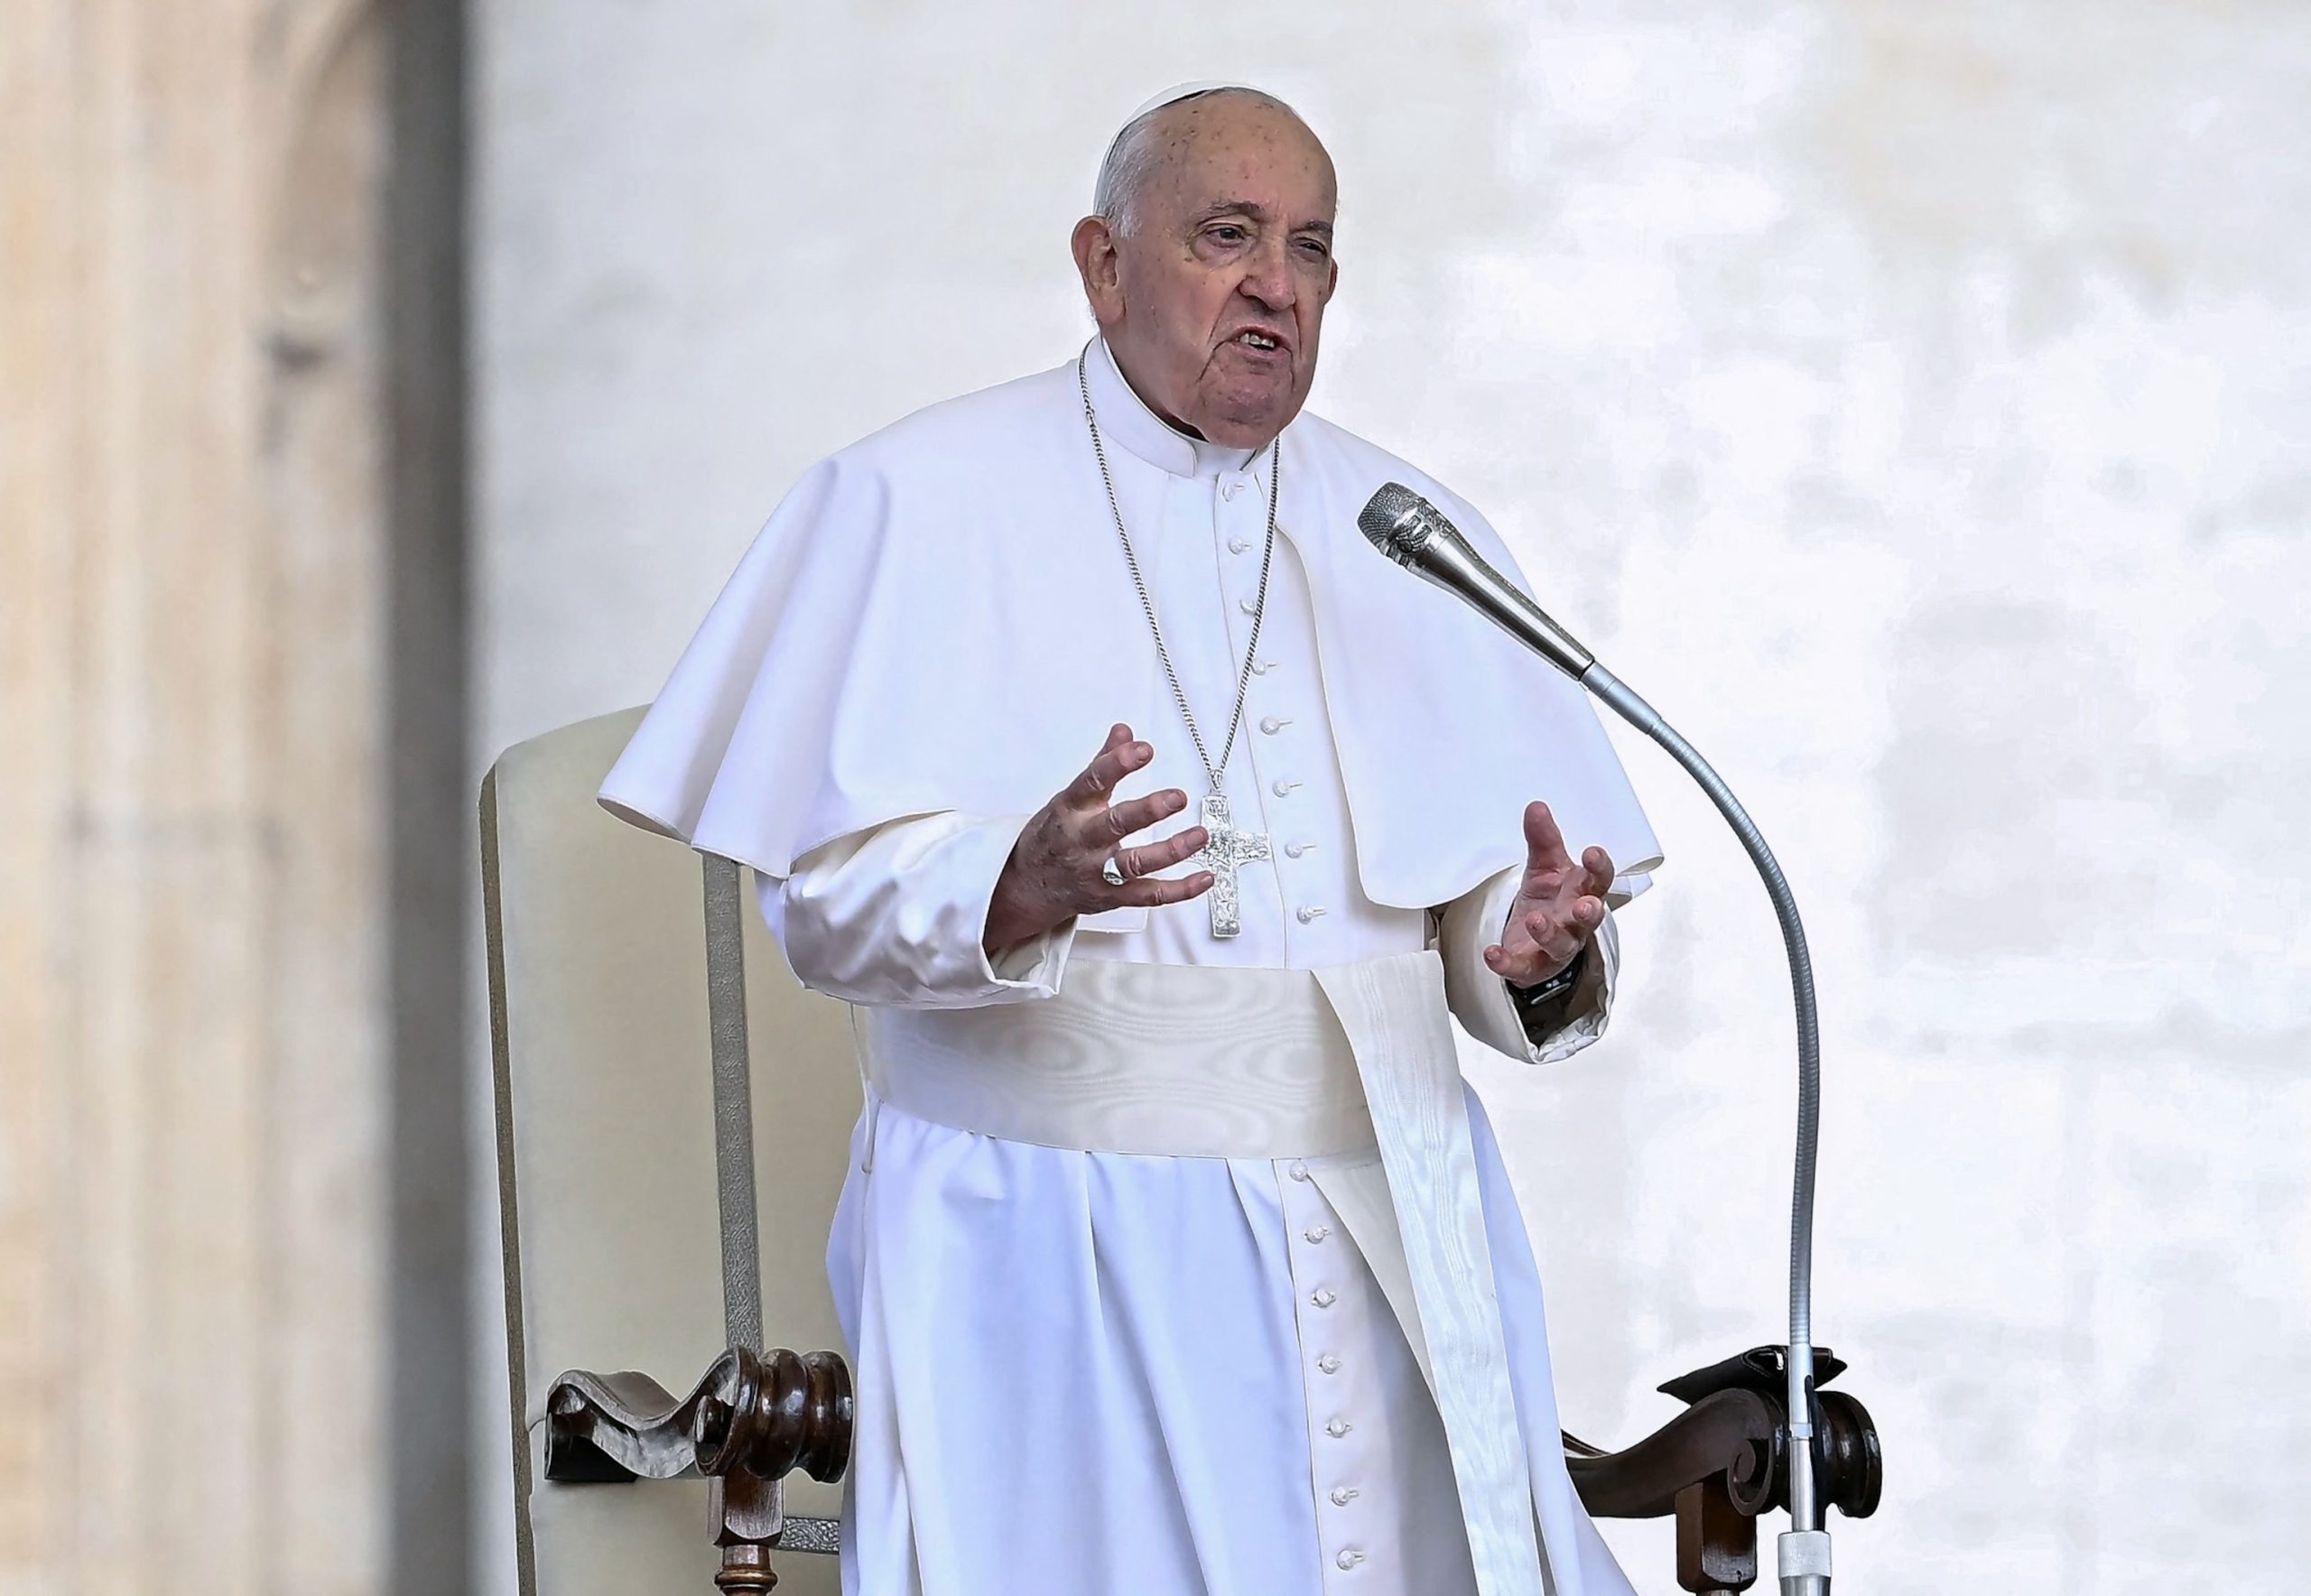 Pope issues apology for using offensive term for gay men